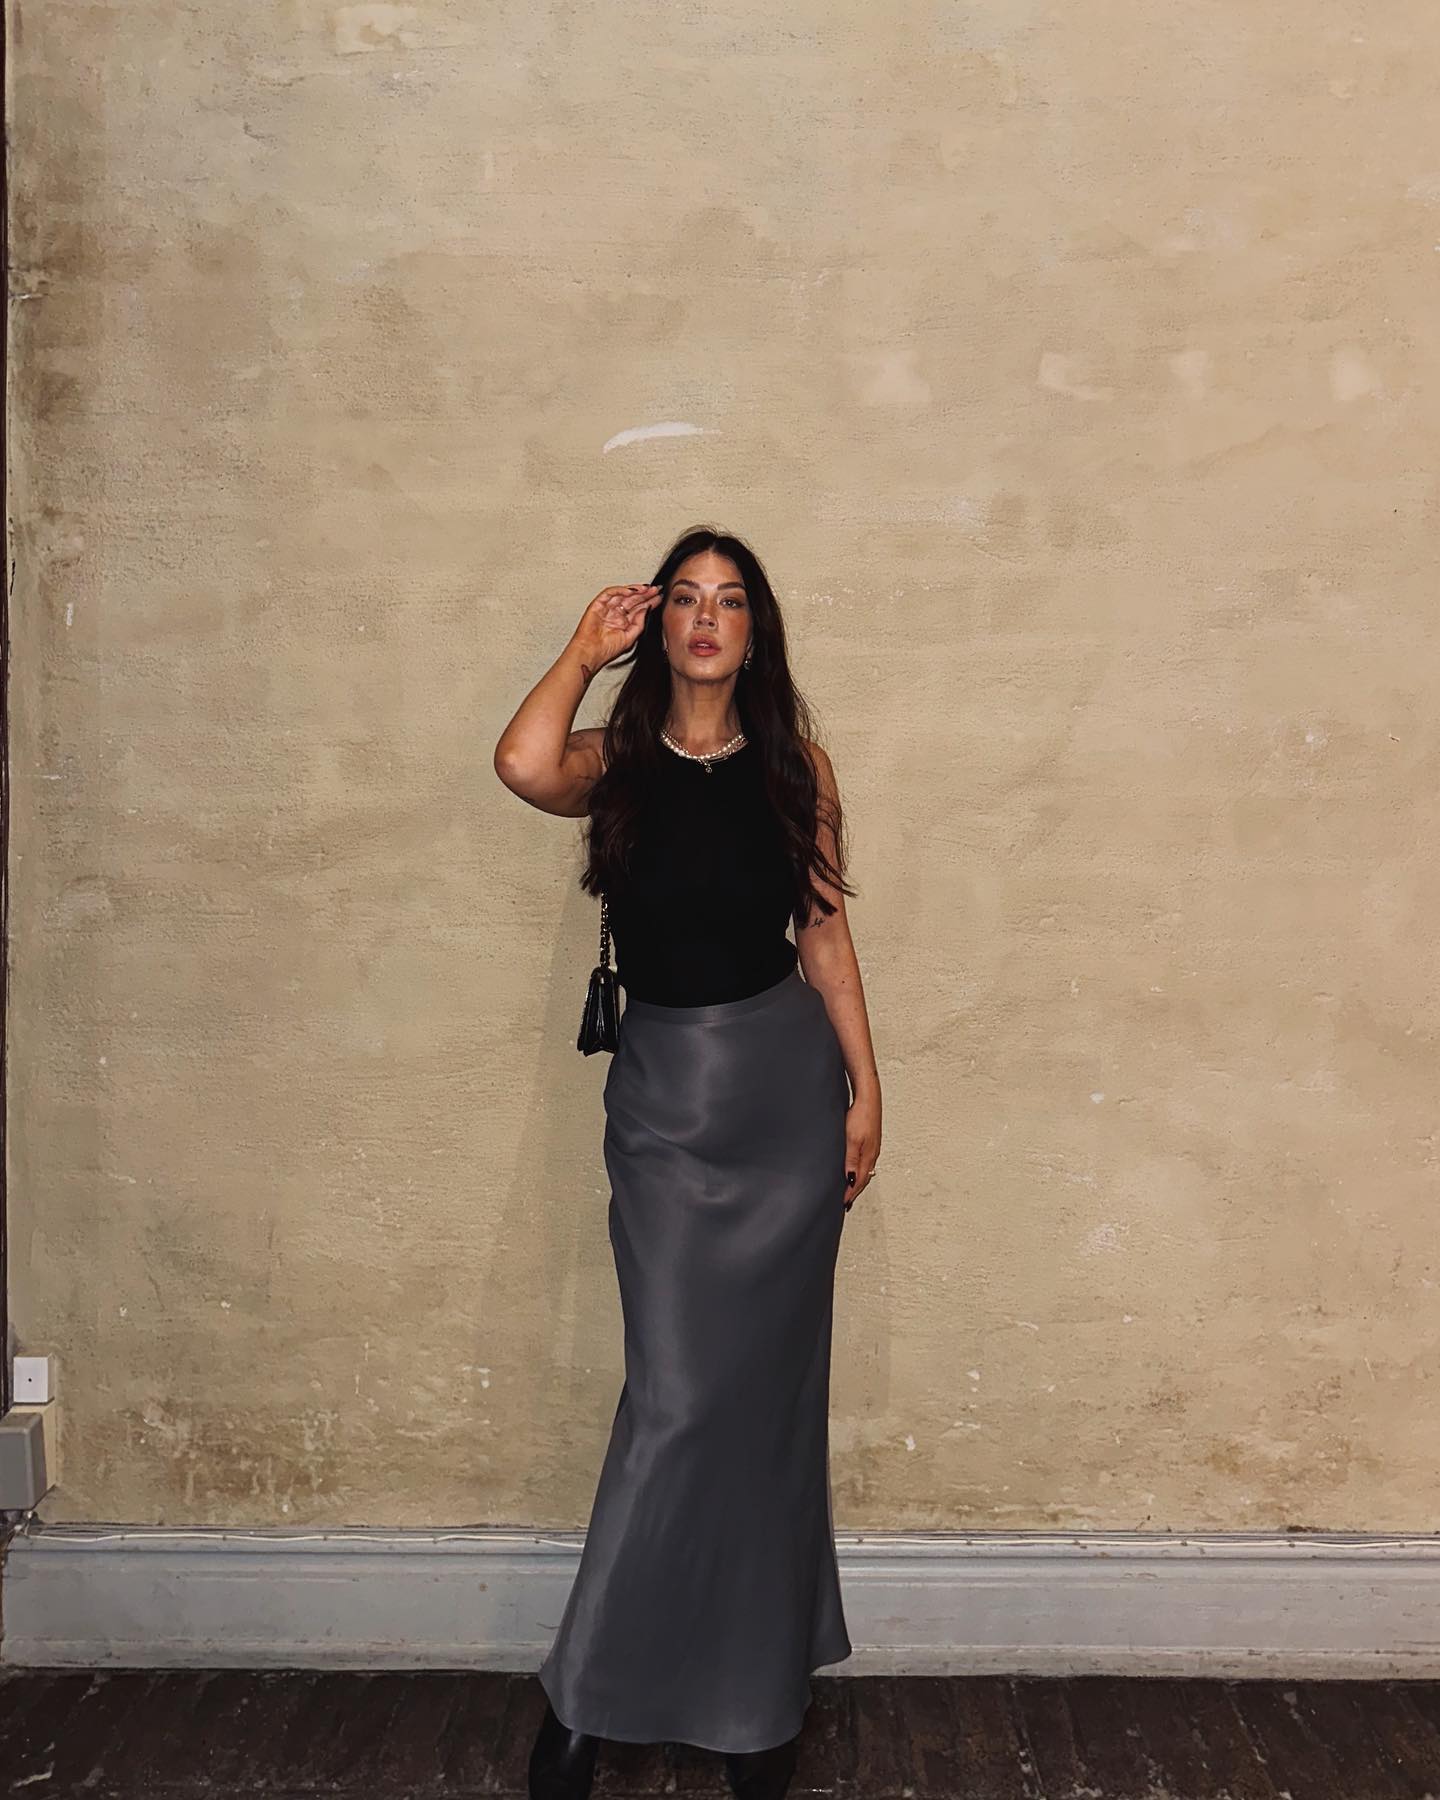 How To Wear With Maxi Skirt Trend If You're Petite | Who What Wear UK